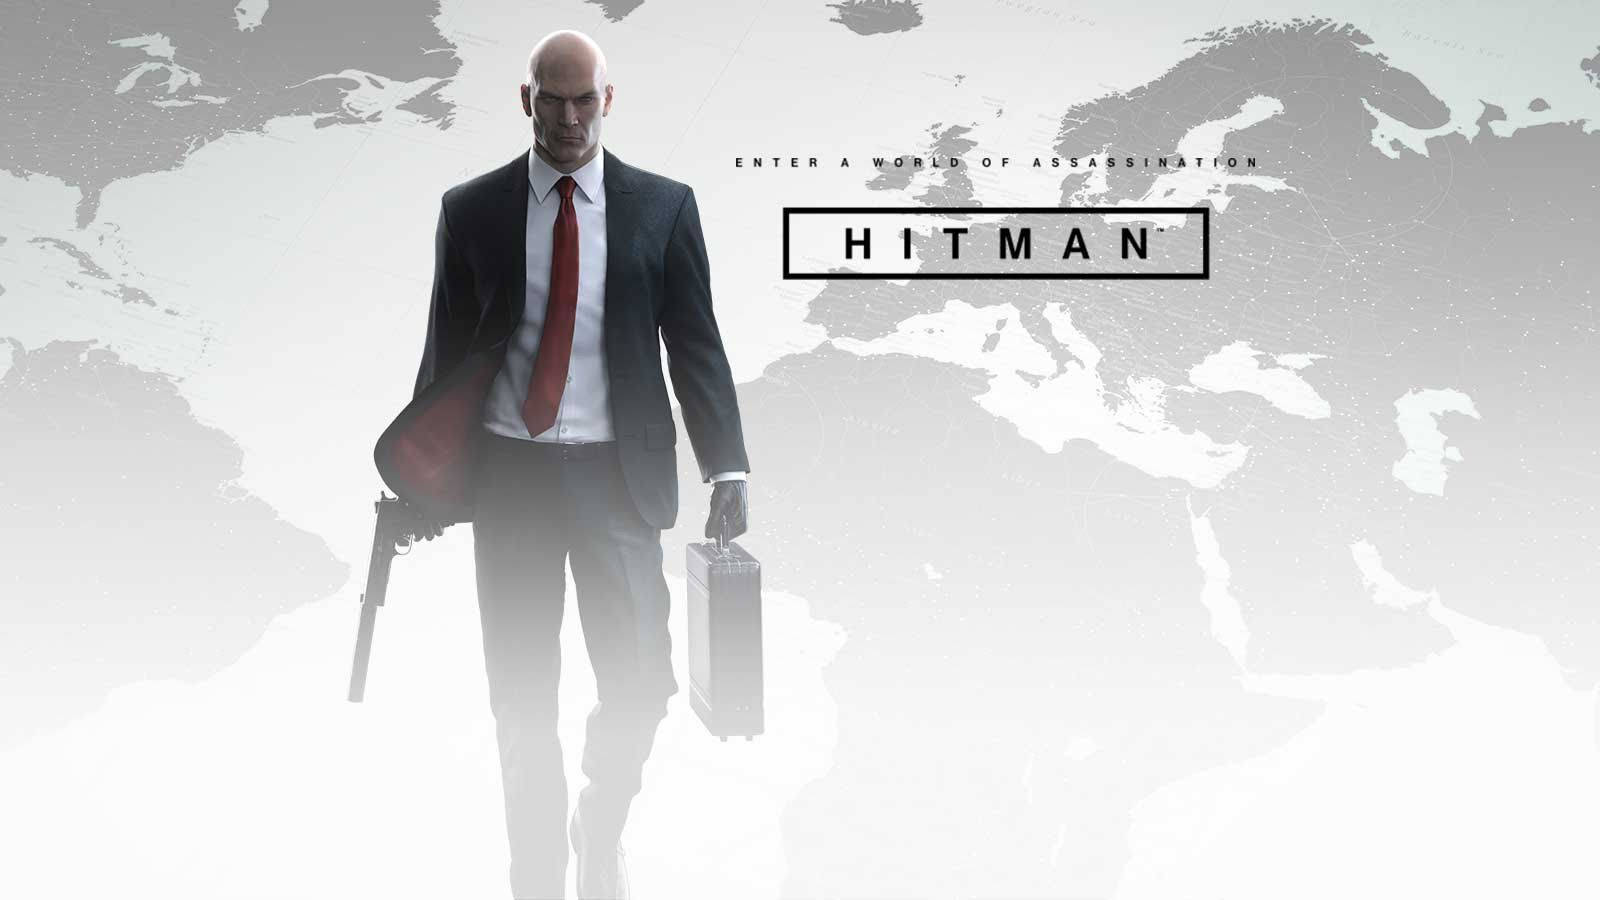 Hitman With World Map Background